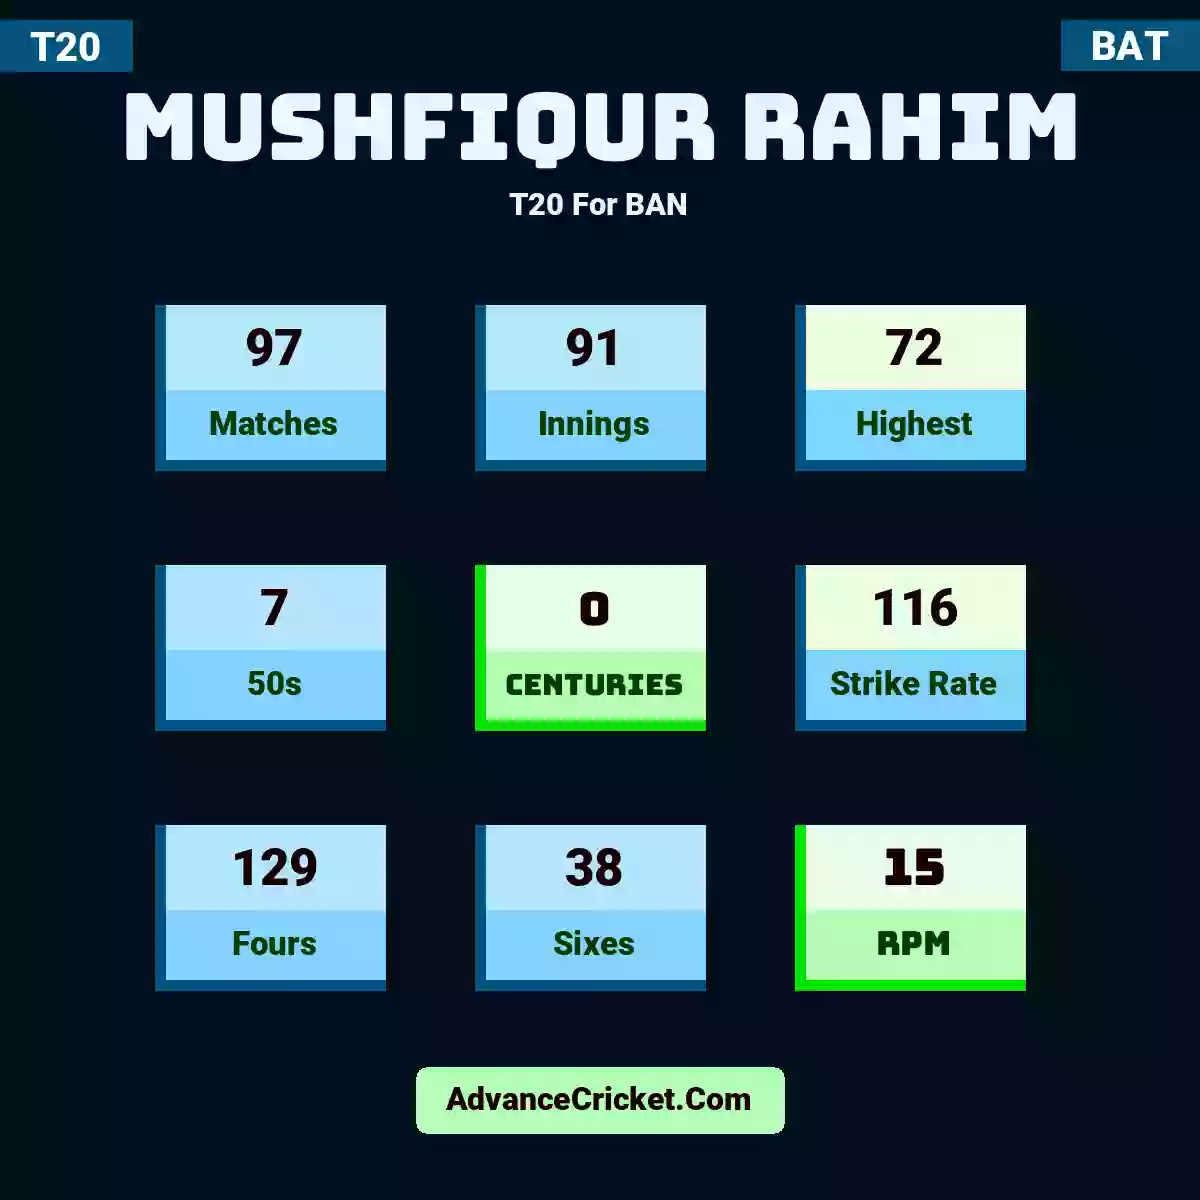 Mushfiqur Rahim T20  For BAN, Mushfiqur Rahim played 97 matches, scored 72 runs as highest, 7 half-centuries, and 0 centuries, with a strike rate of 116. M.Rahim hit 129 fours and 38 sixes, with an RPM of 15.